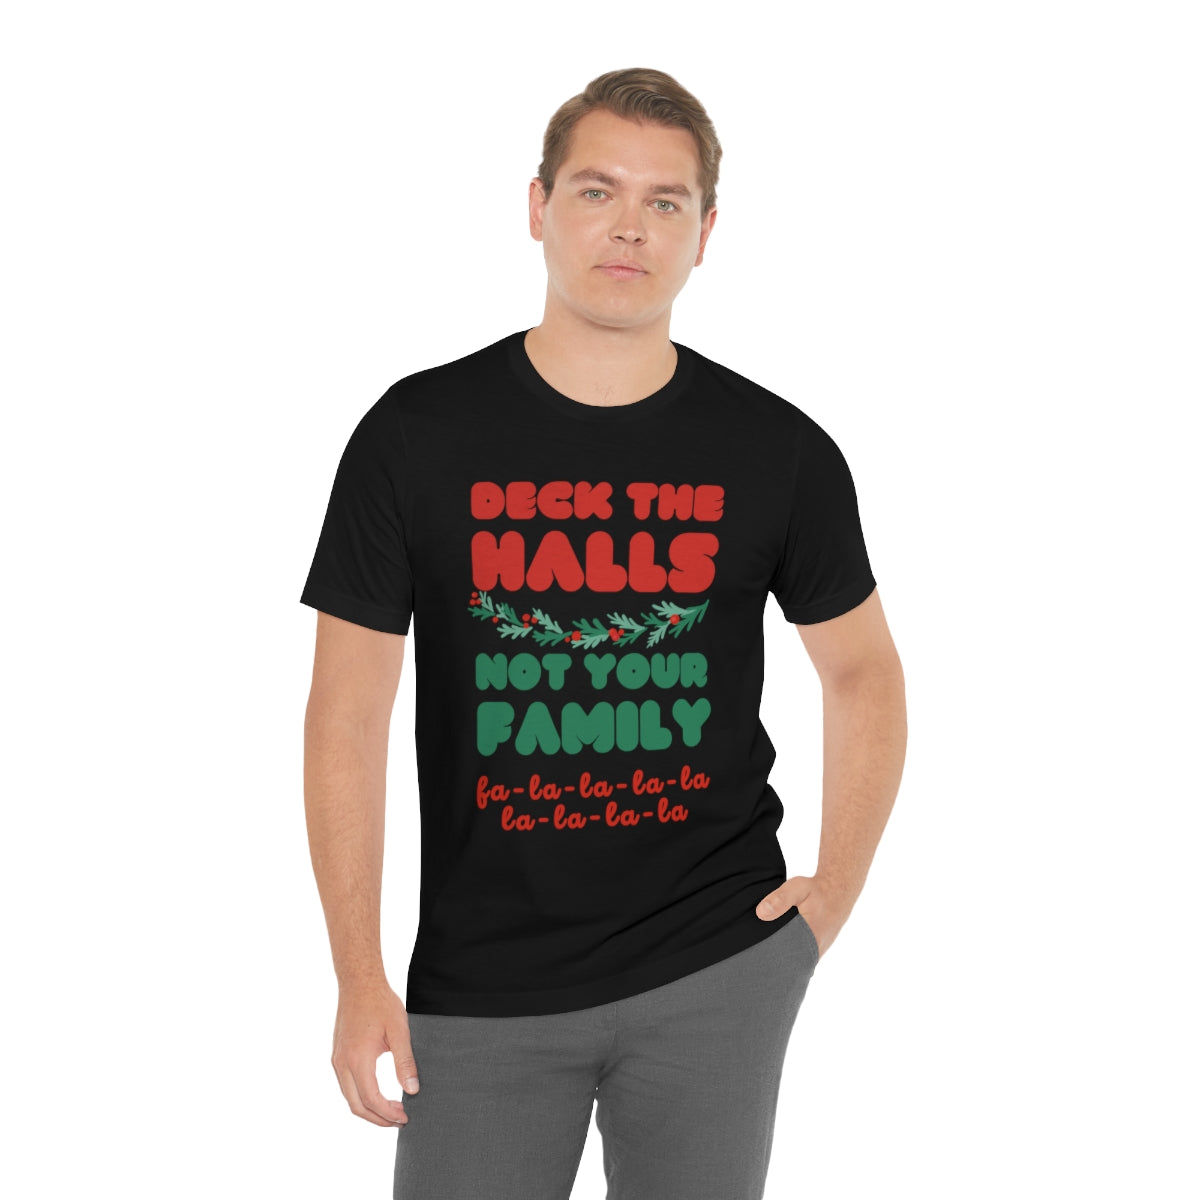 Deck the halls not your family 2 Unisex Jersey Short Sleeve Tee